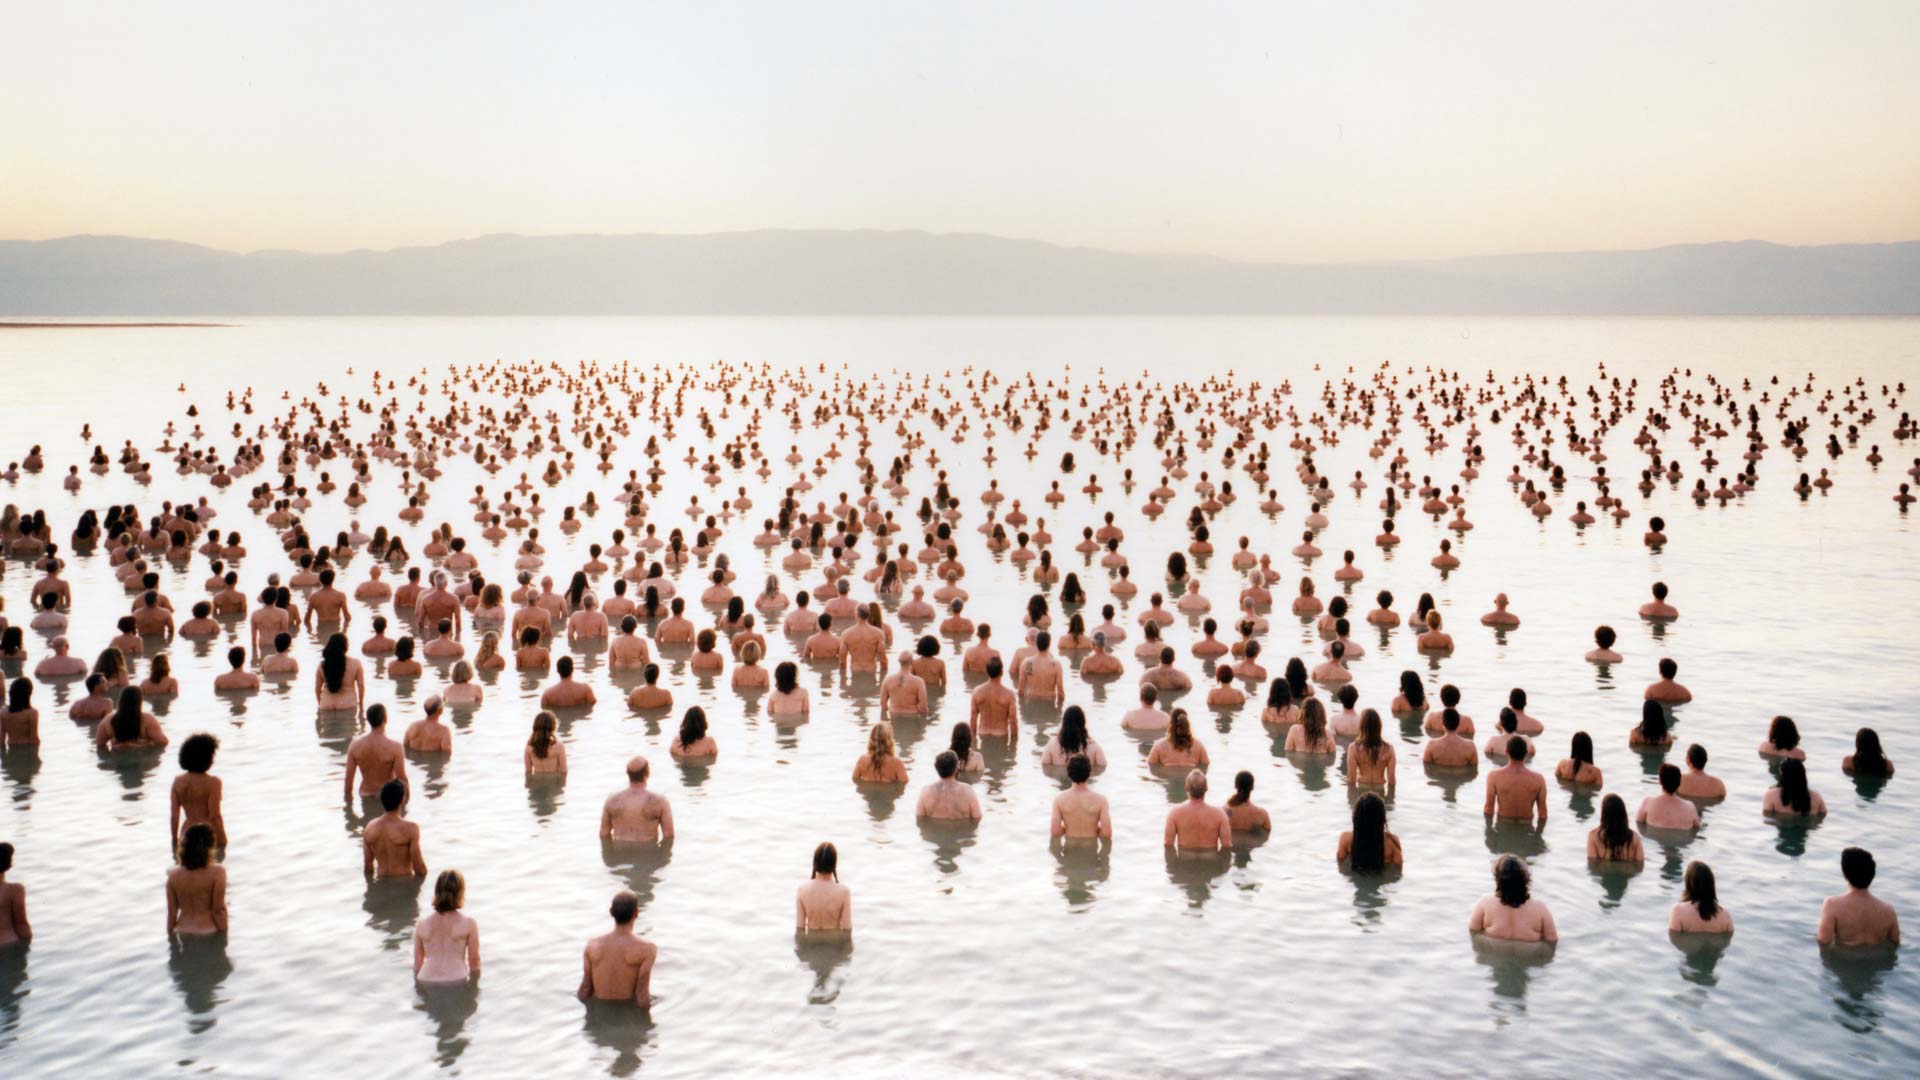 Spencer Tunick is coming to Finland &#8211; Kuopio will be stripping off this summer!